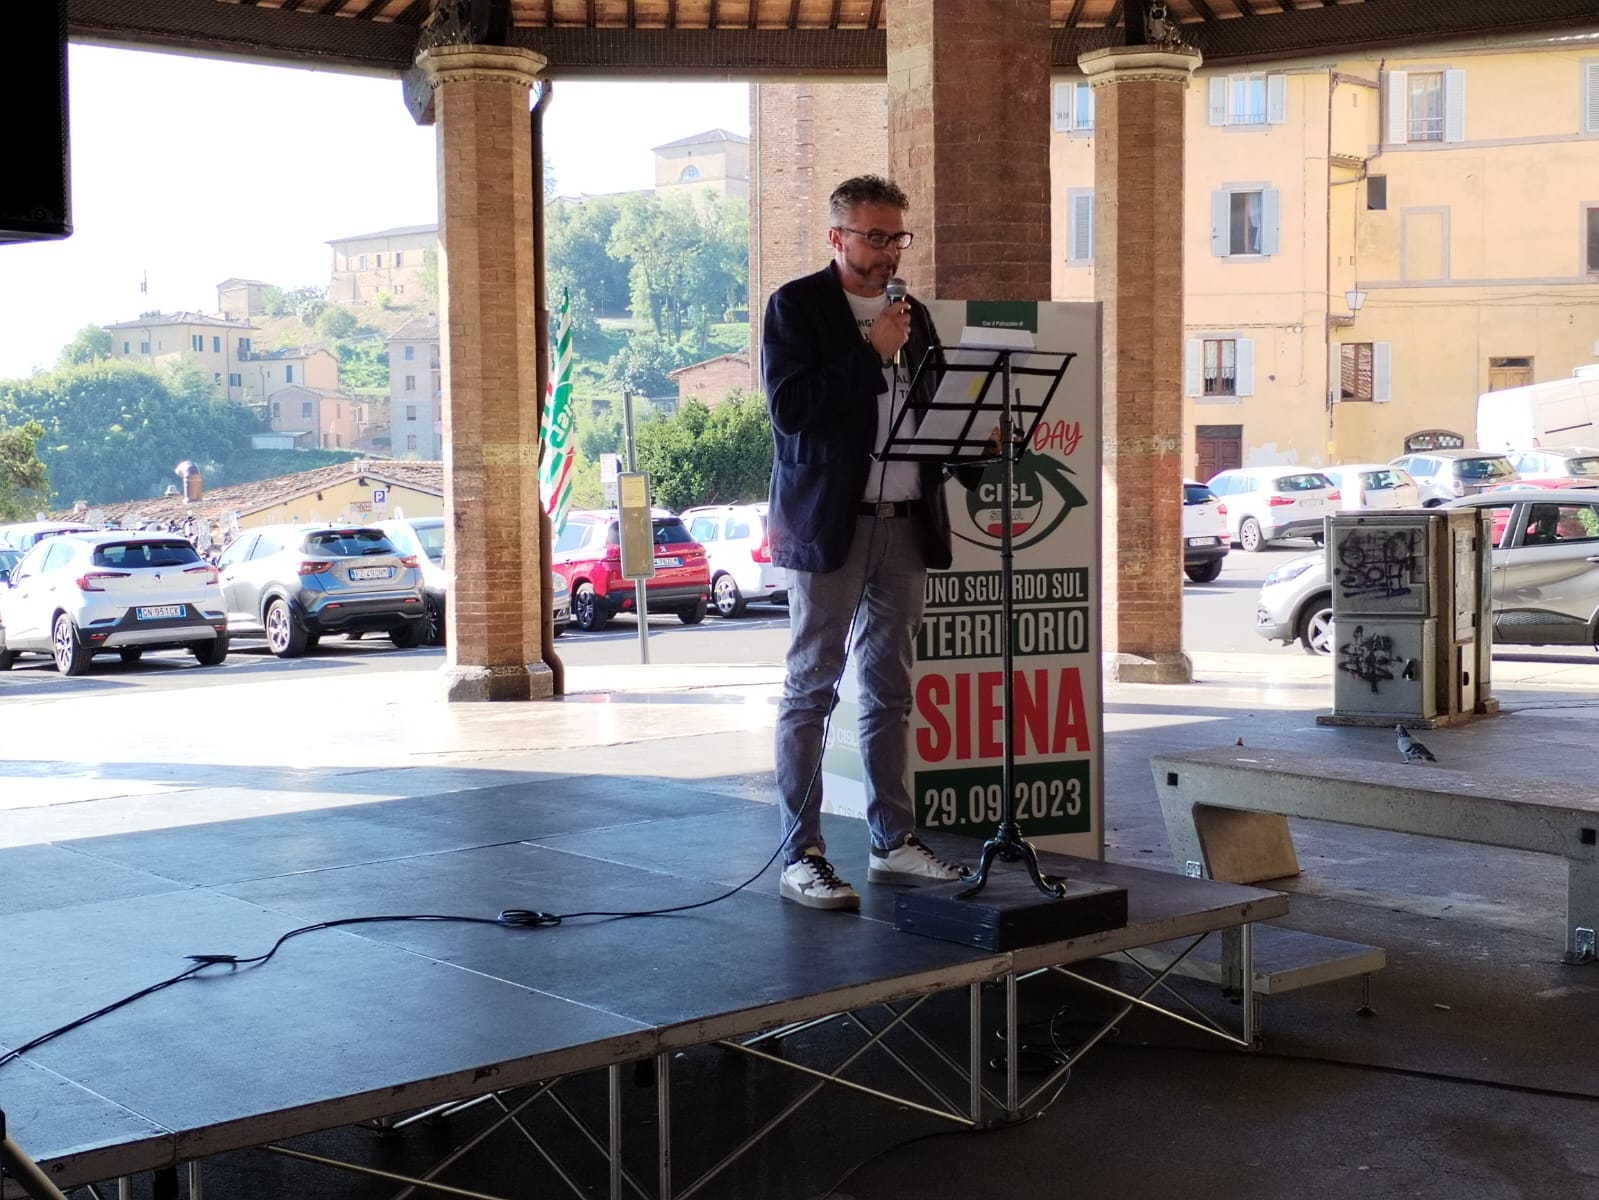 Cisl's Open Day showcases Siena's thriving economy, says Pucci